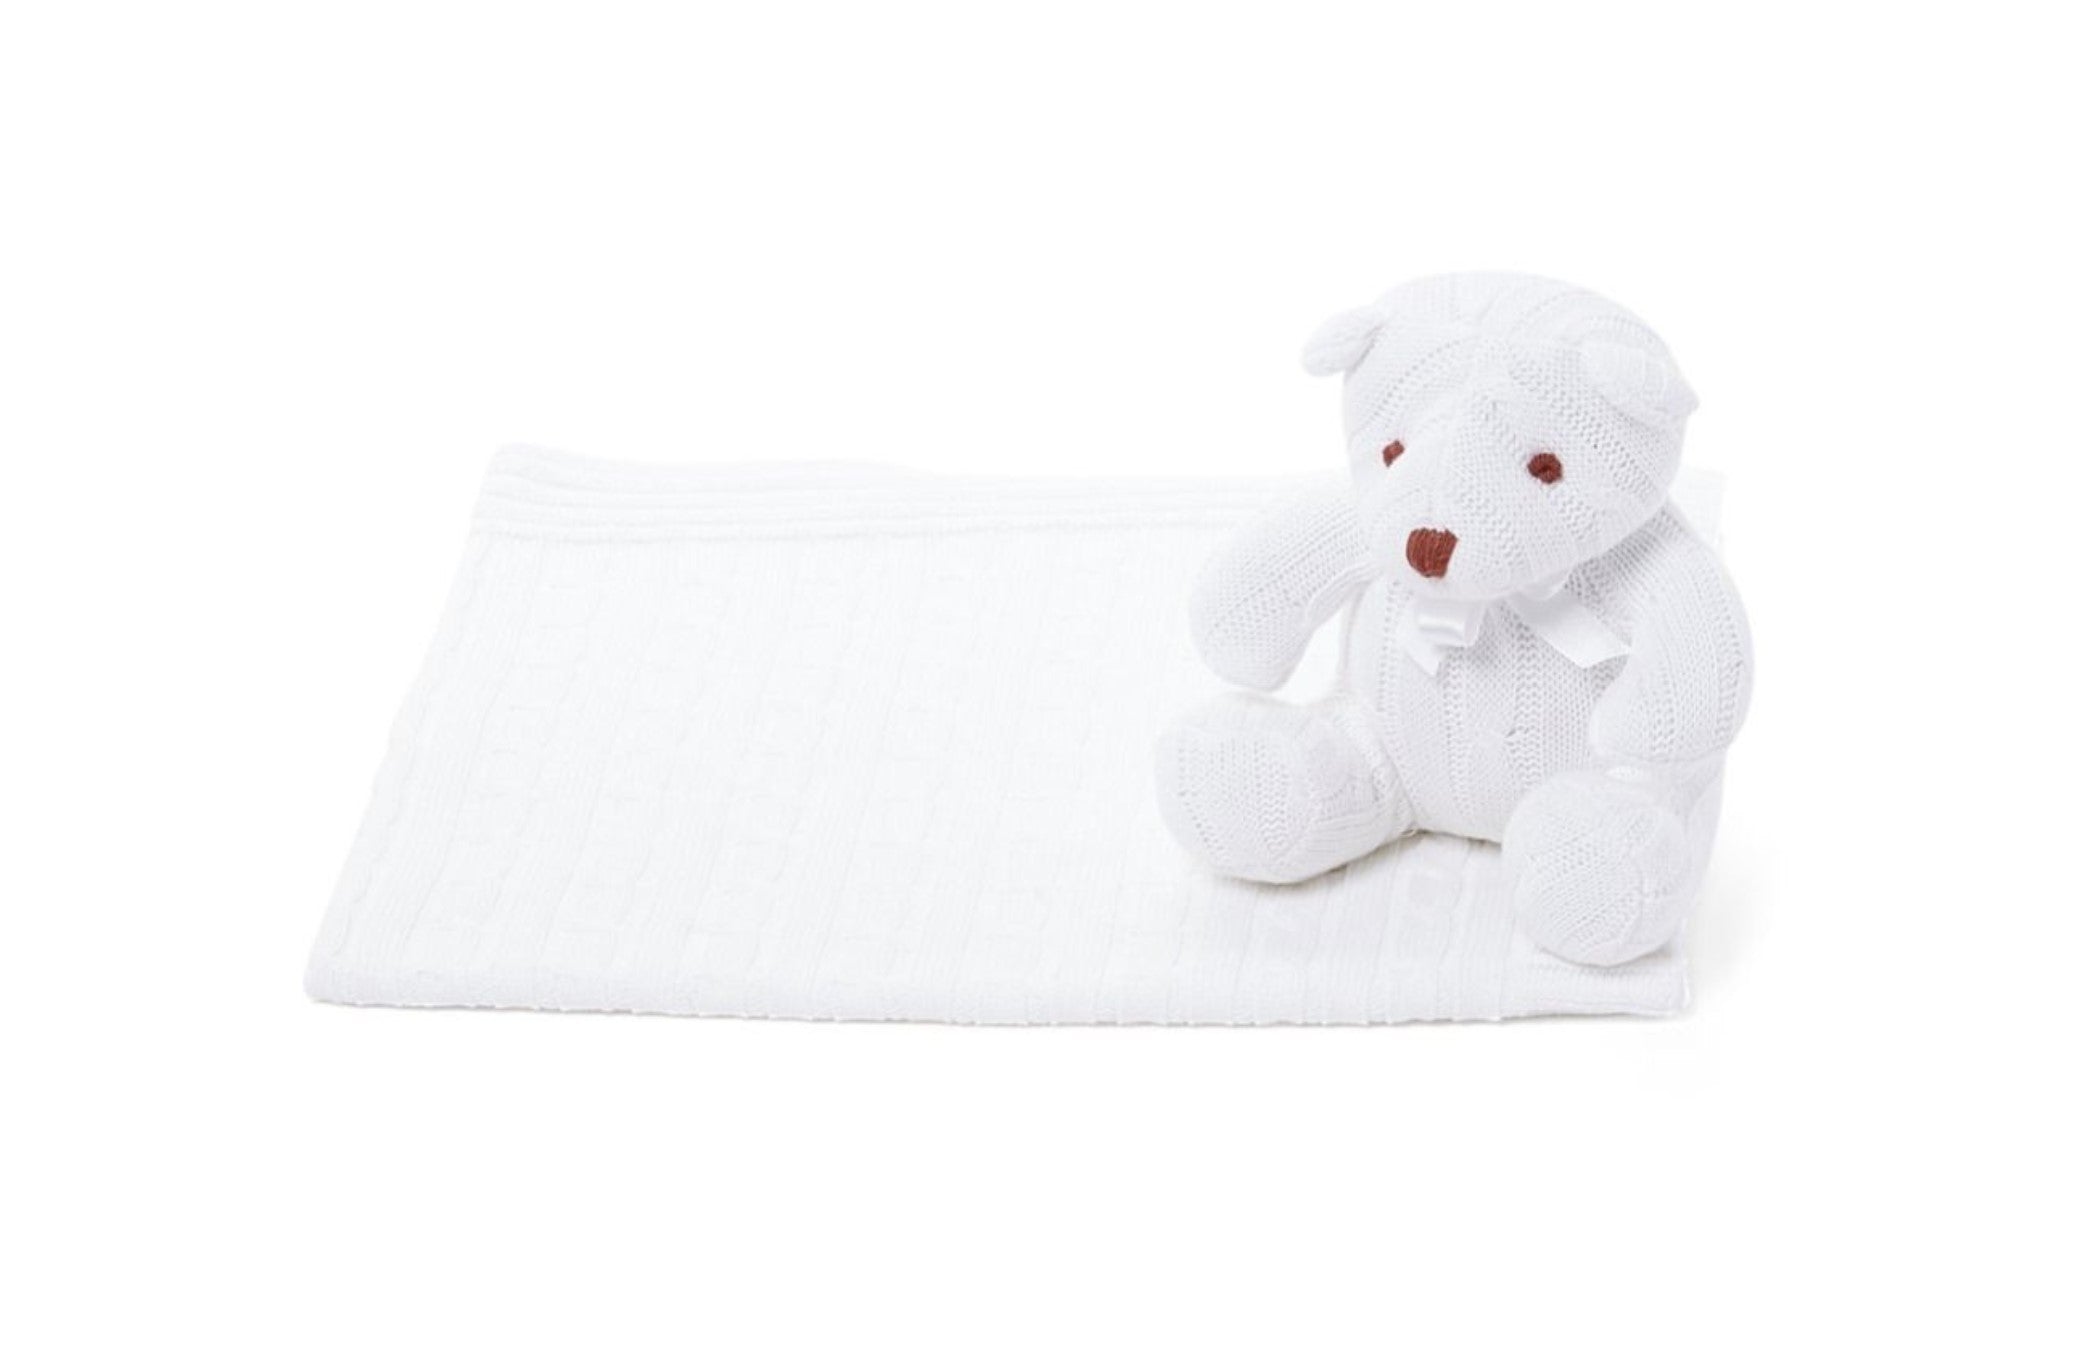 Cable Knit Baby Blanket Set (with Teddy Bear) -- 30 x 36 in - White Color